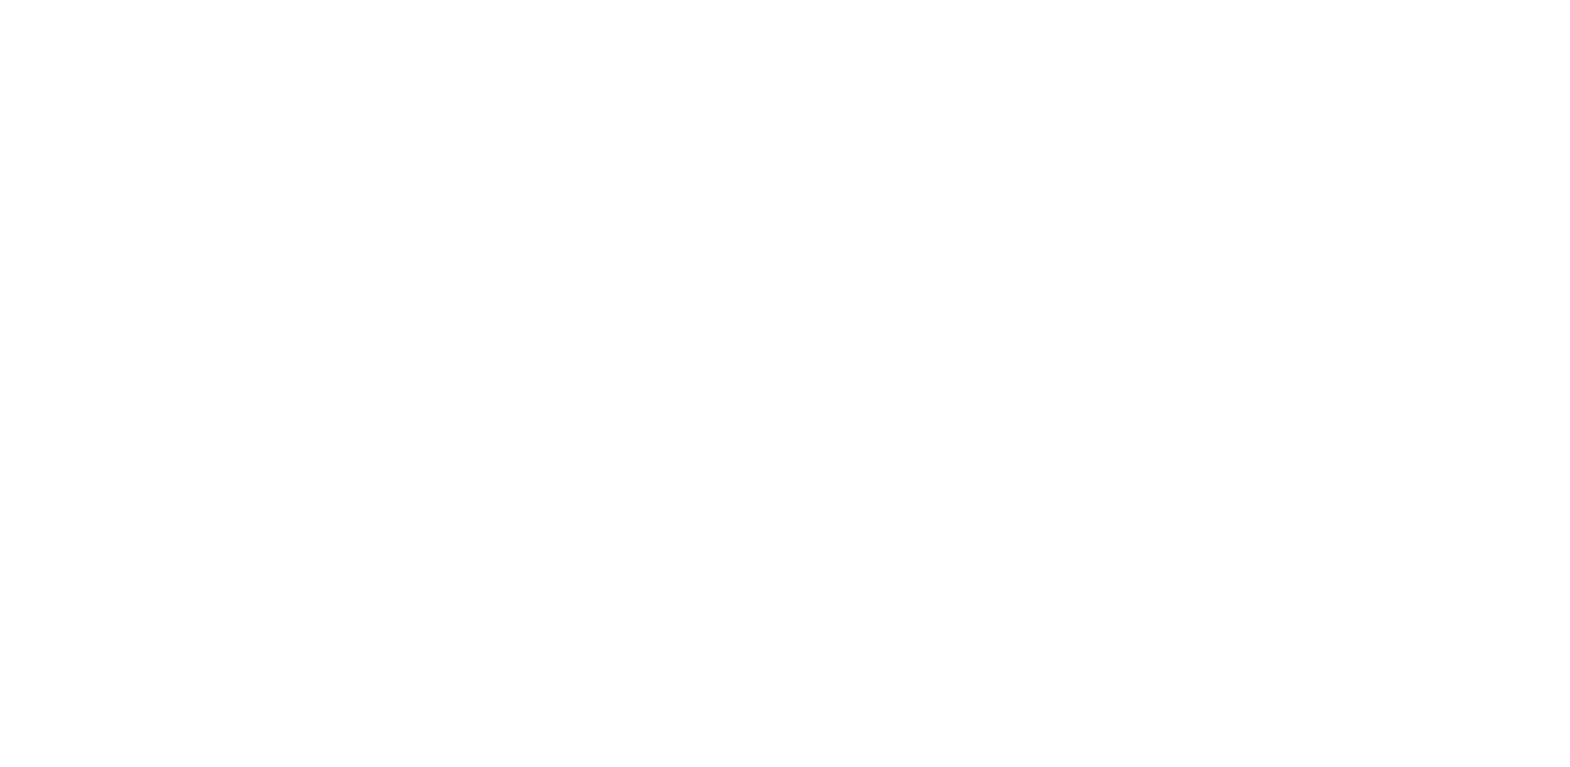 https://www.spam.com/wp-content/uploads/2019/10/image-icon_skillet-2.png